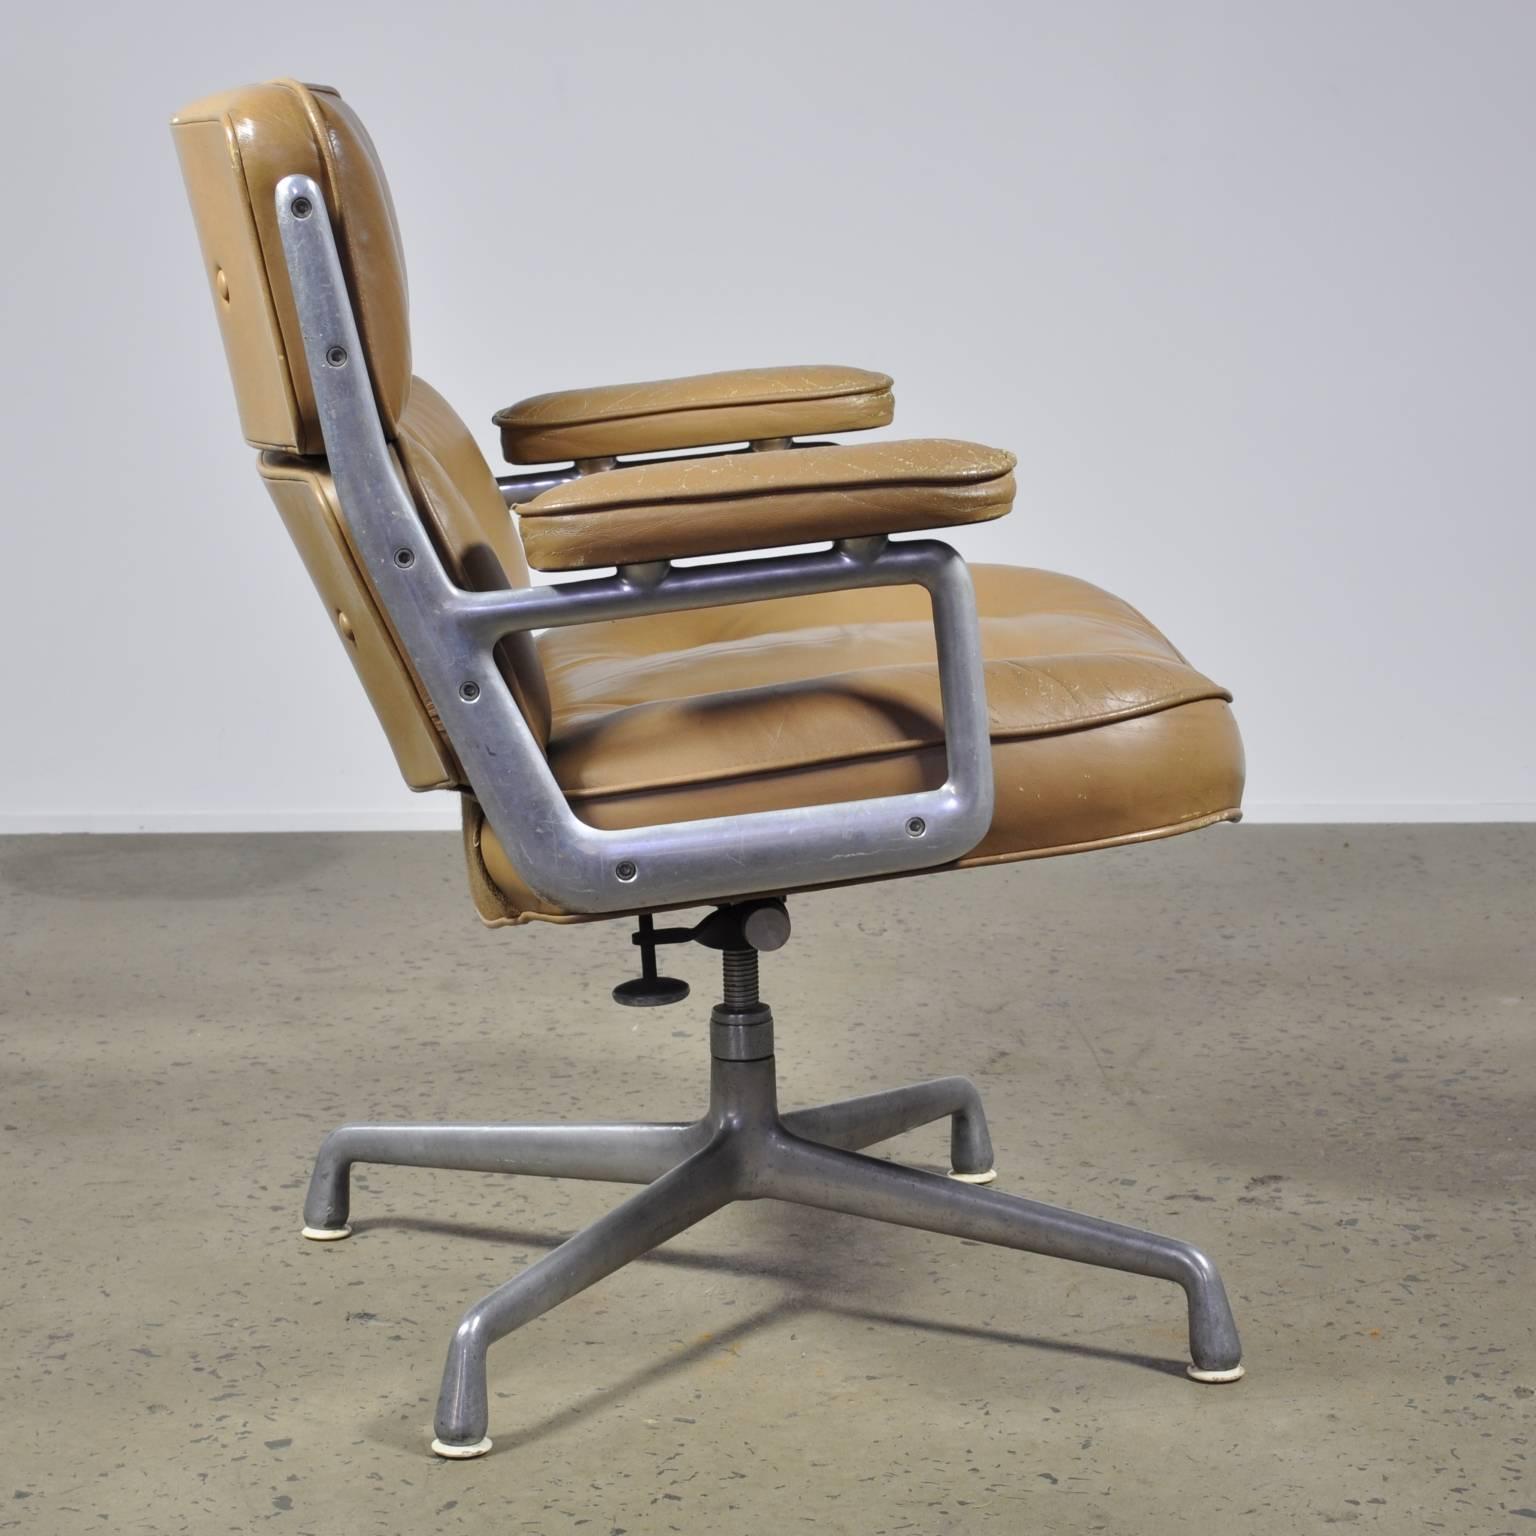 Also known as the Time-Life chair, this iconic piece was originally created for the executive floors of New York City’s Time-Life Building by Charles Eames in 1960. Combining thick, plush cushions with a generously sized seat the Time-Life chair